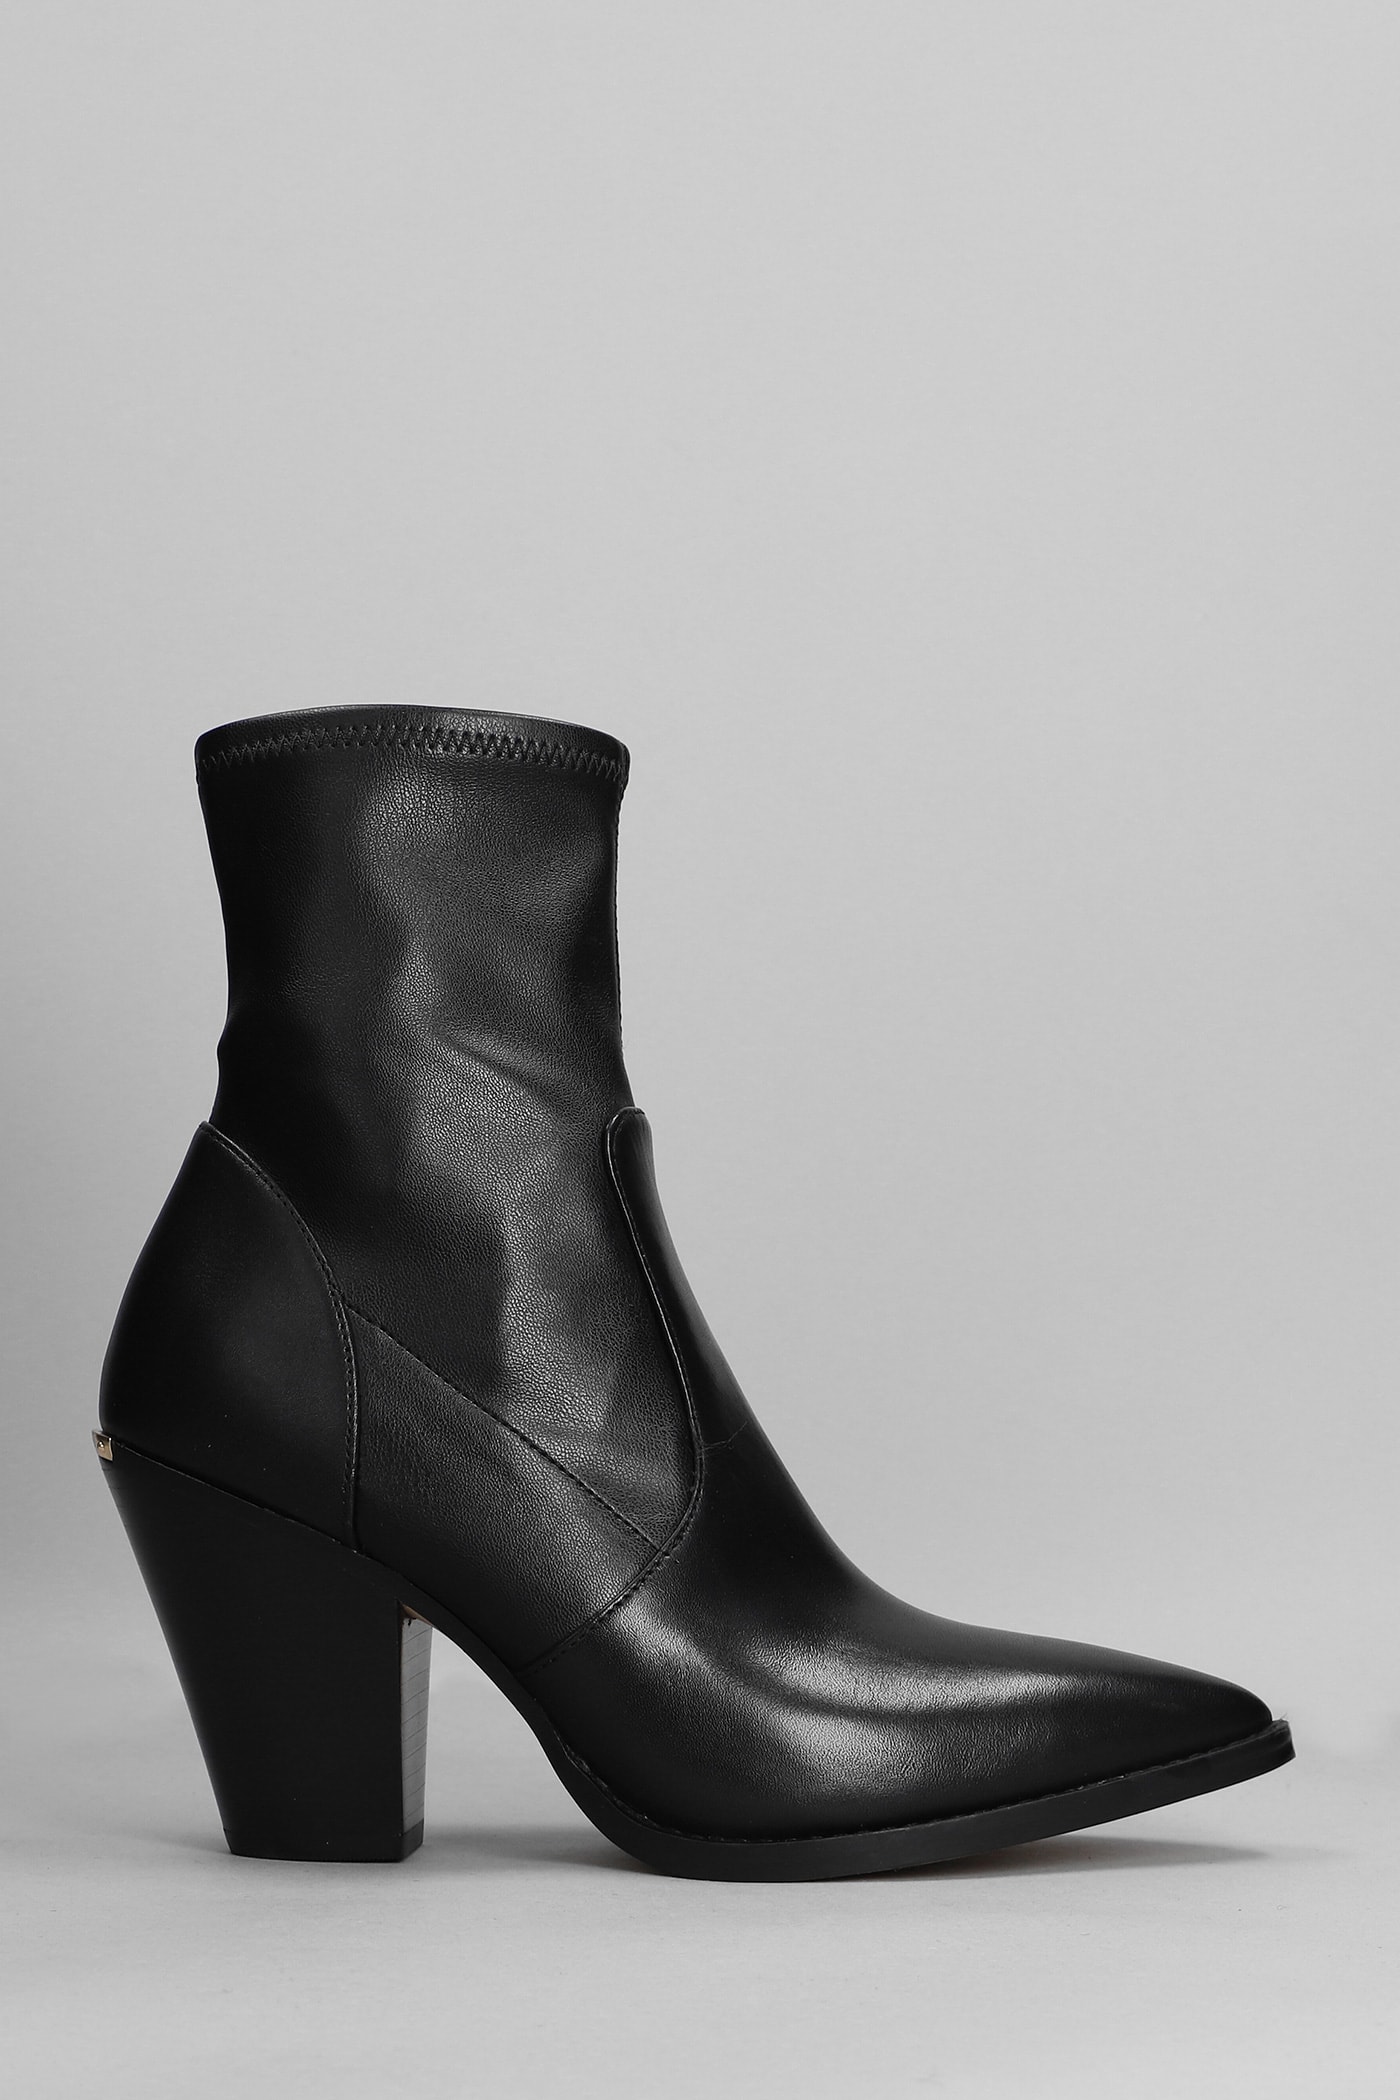 Michael Kors Dover Heeled High Heels Ankle Boots In Black Leather